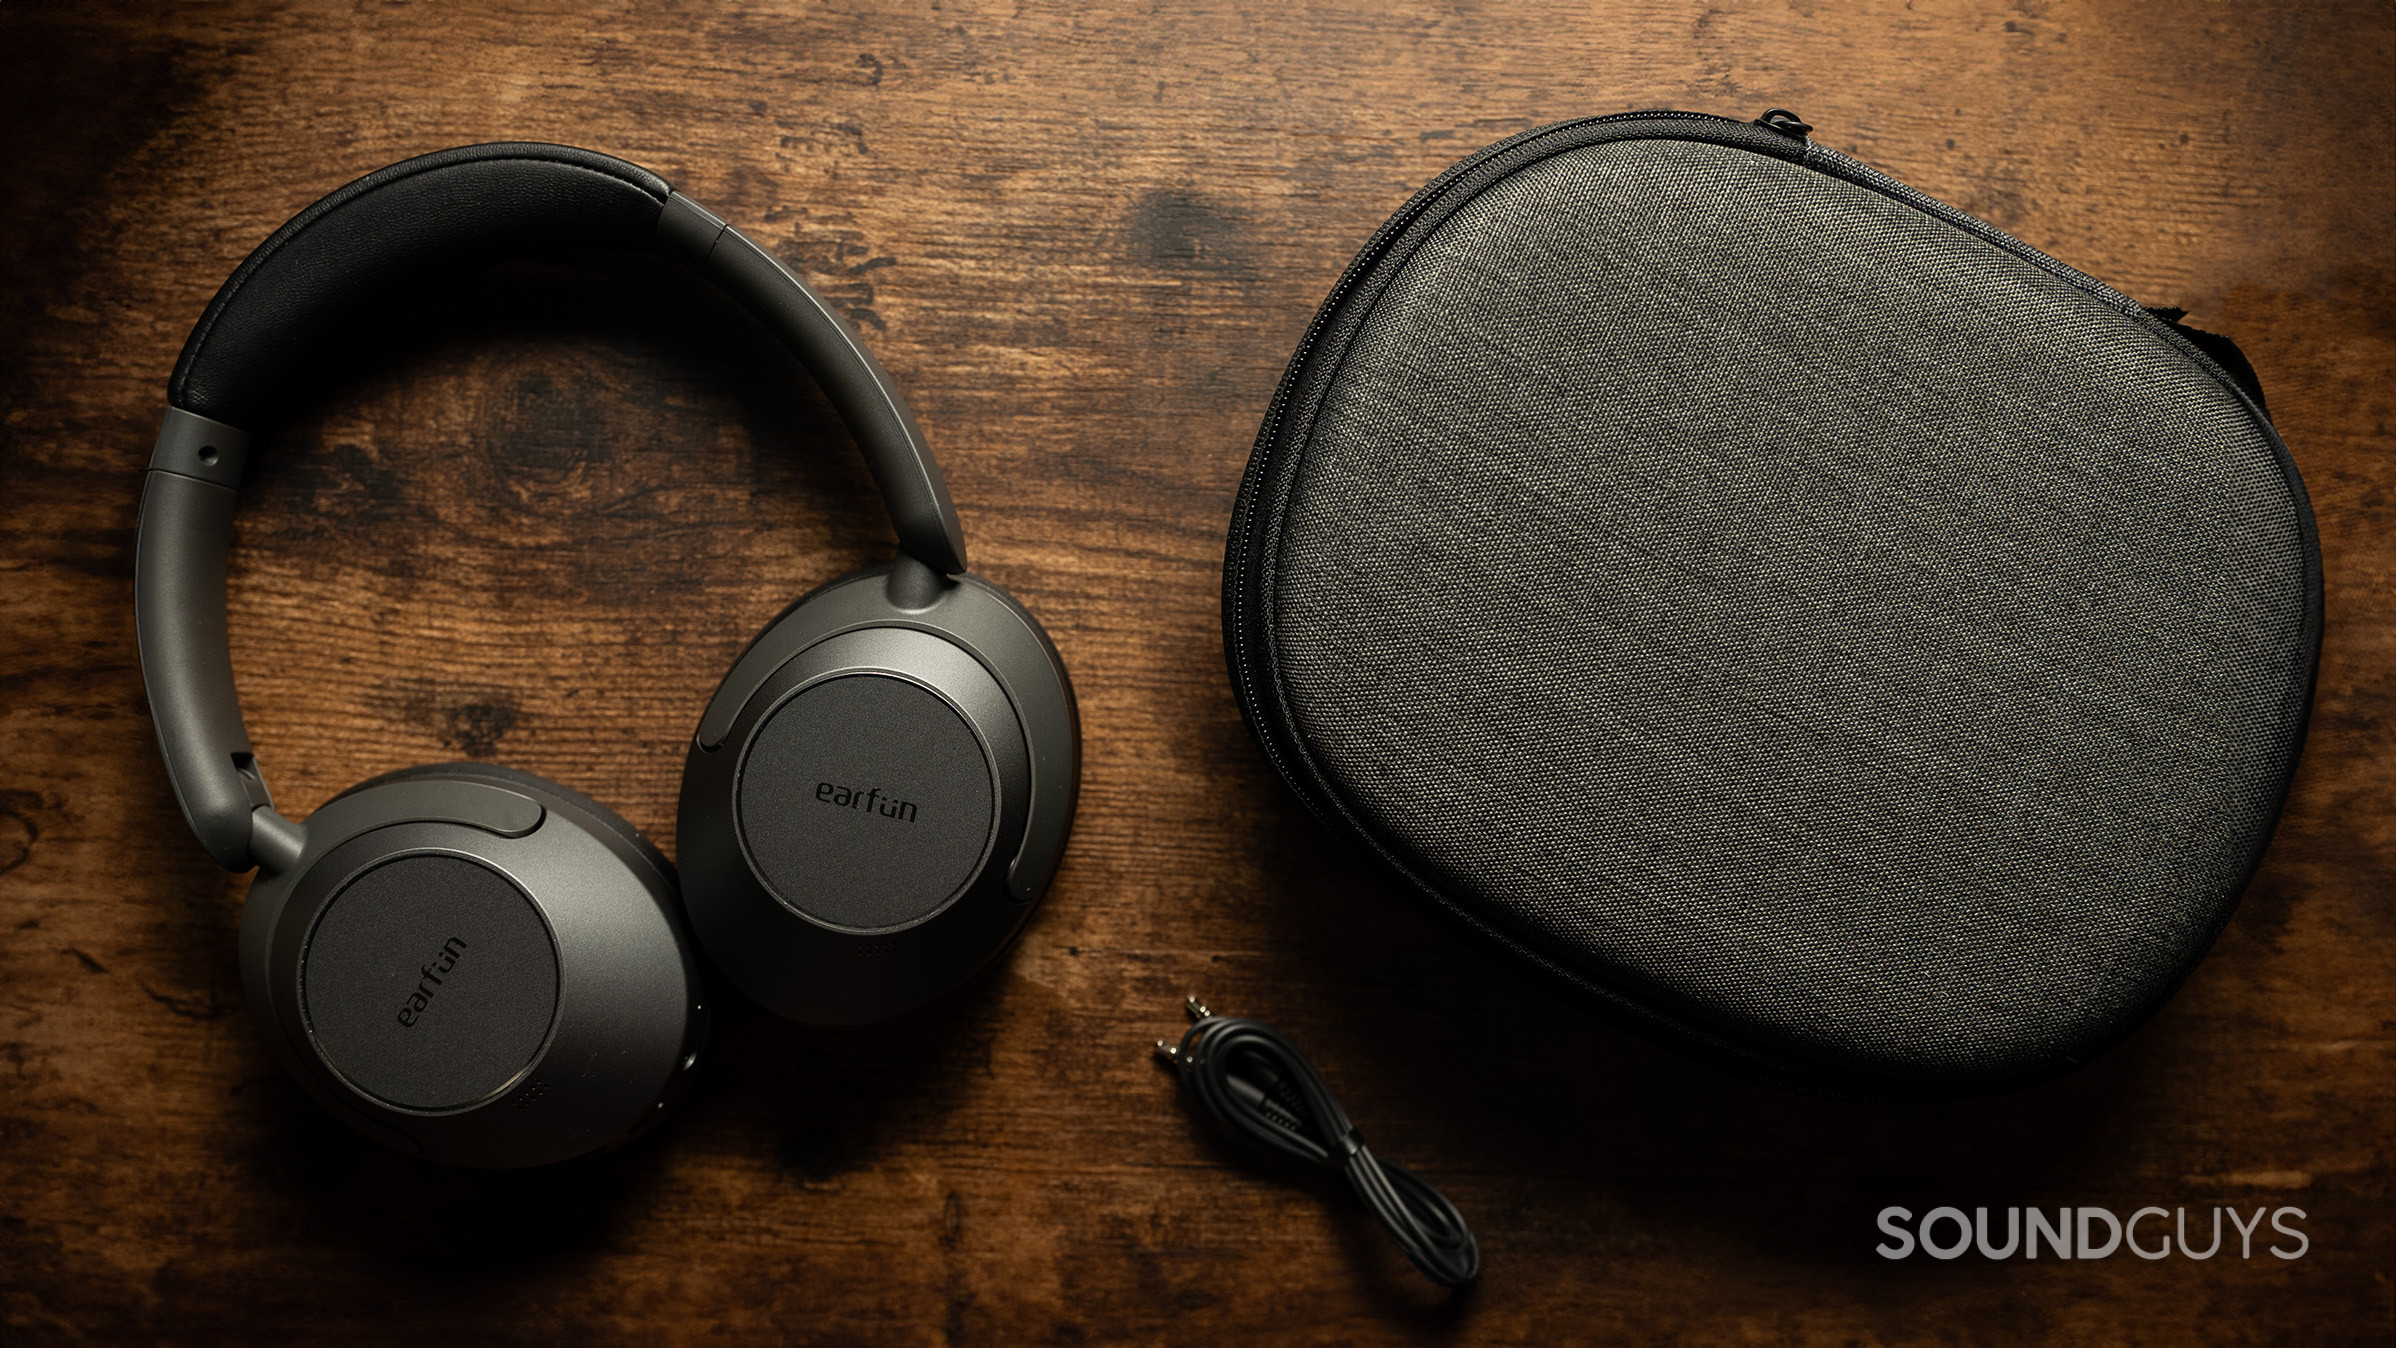 The EarFun Wave Pro headphones next to an audio cable and headphone case.